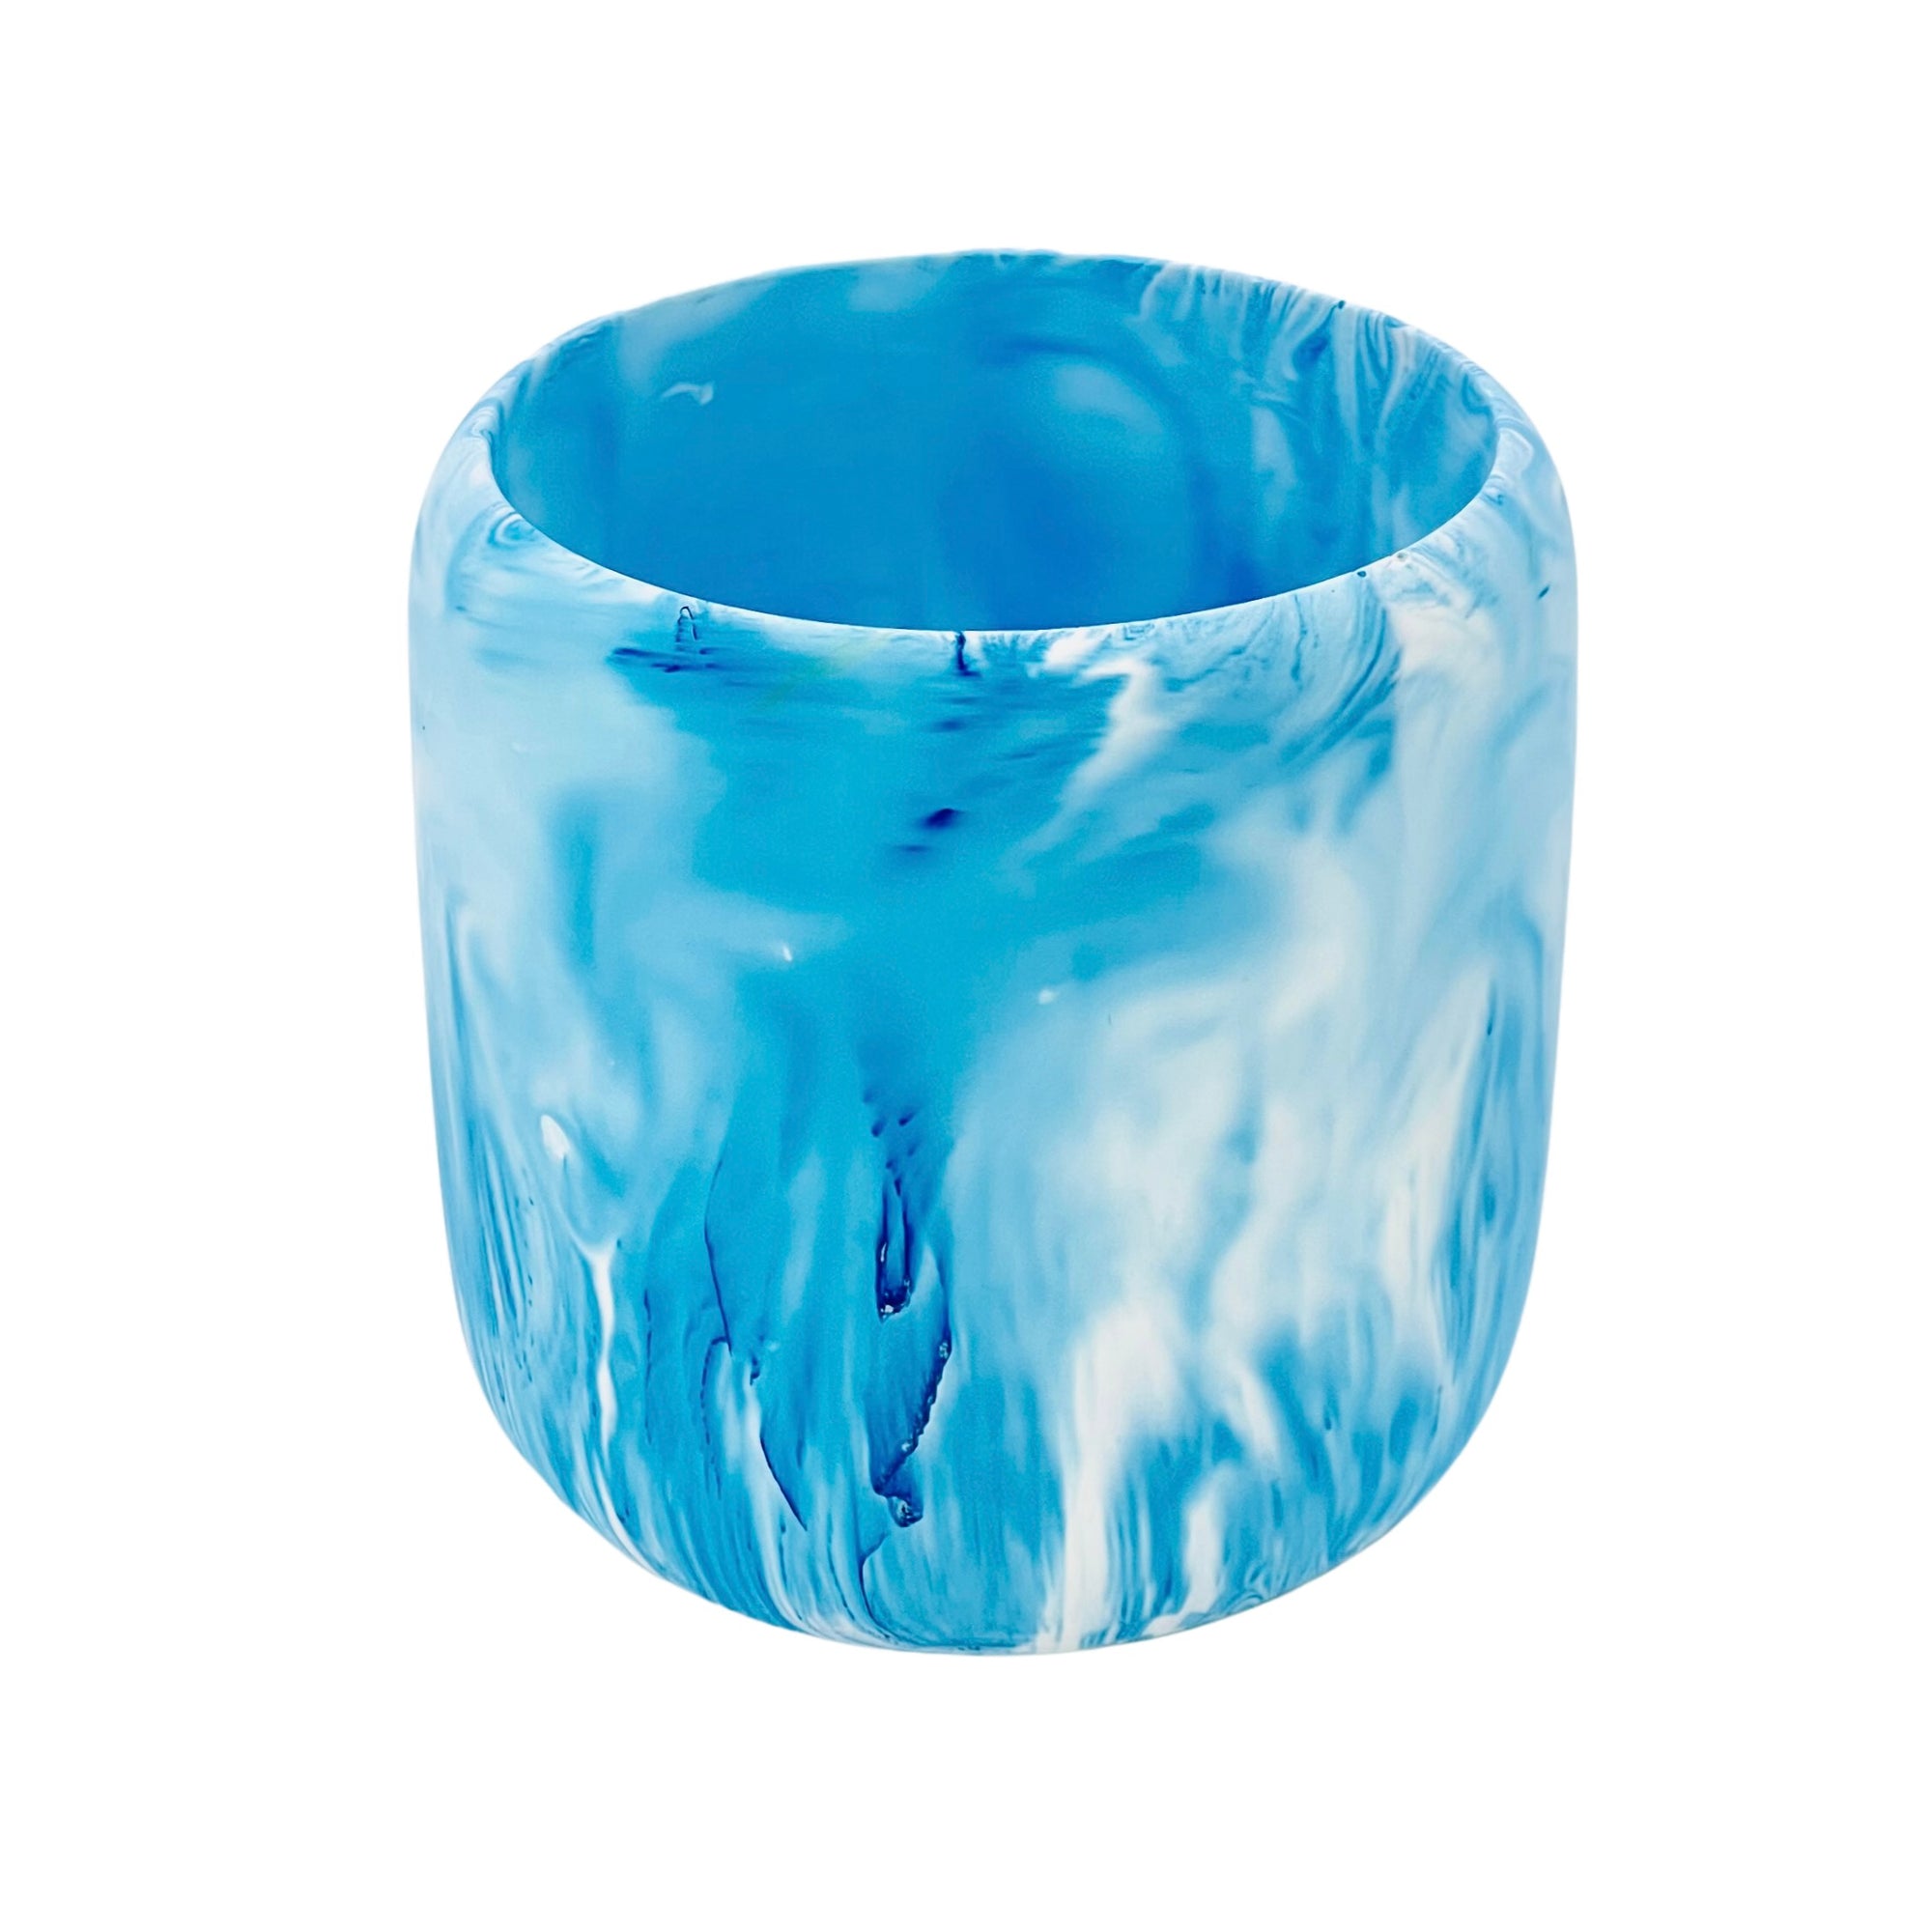 A Jesmonite tumbler with a 8.50cm diameter marbled with blue pigment.